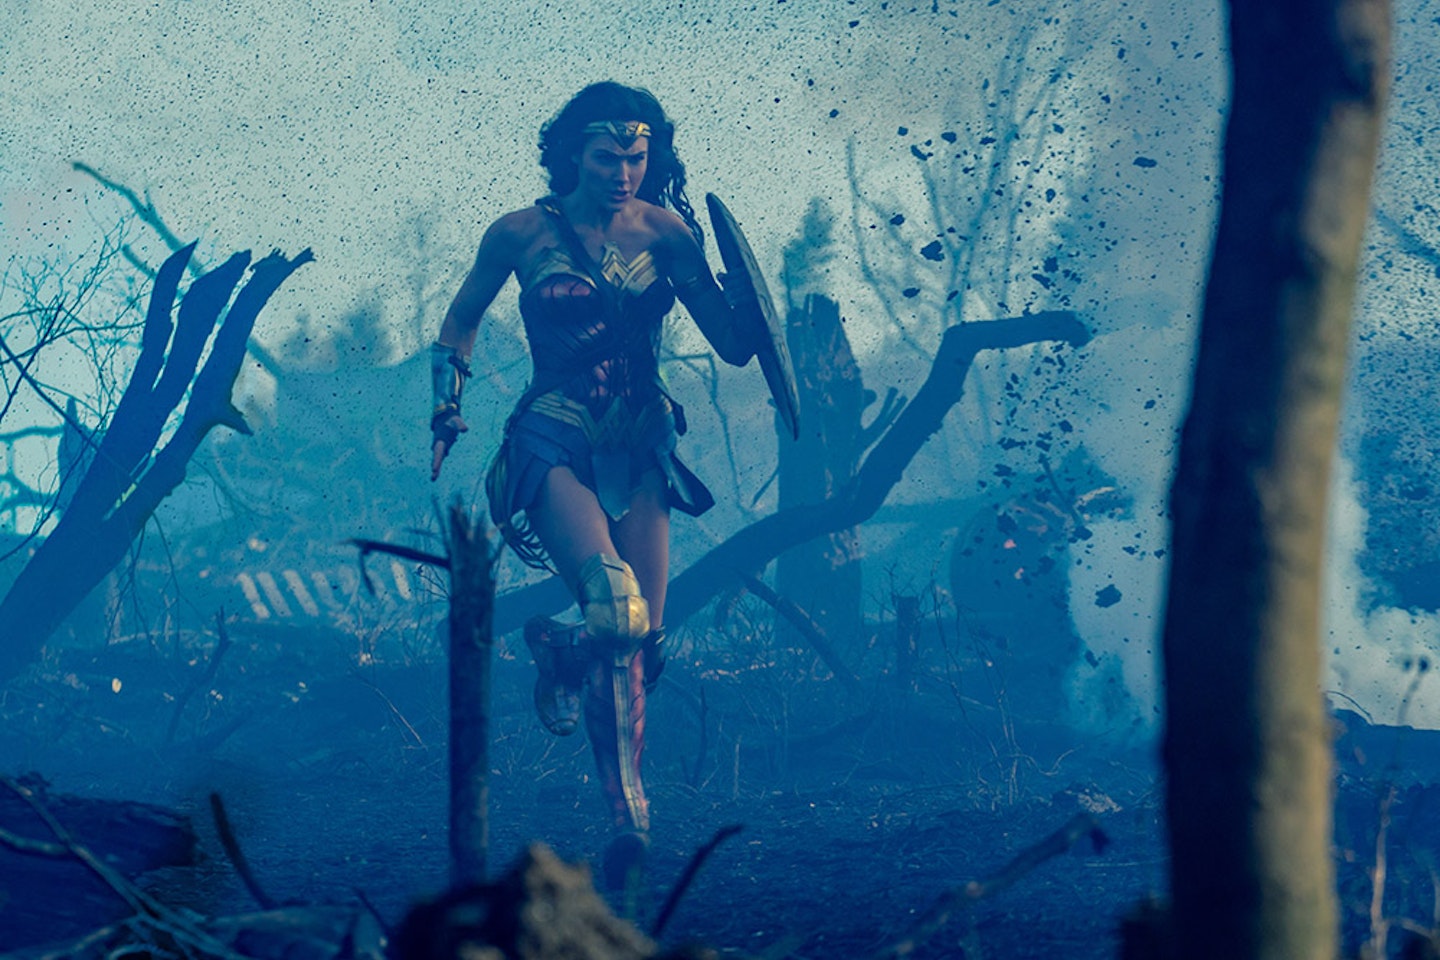 Wonder Woman costumes, designed by Lindy Hemming